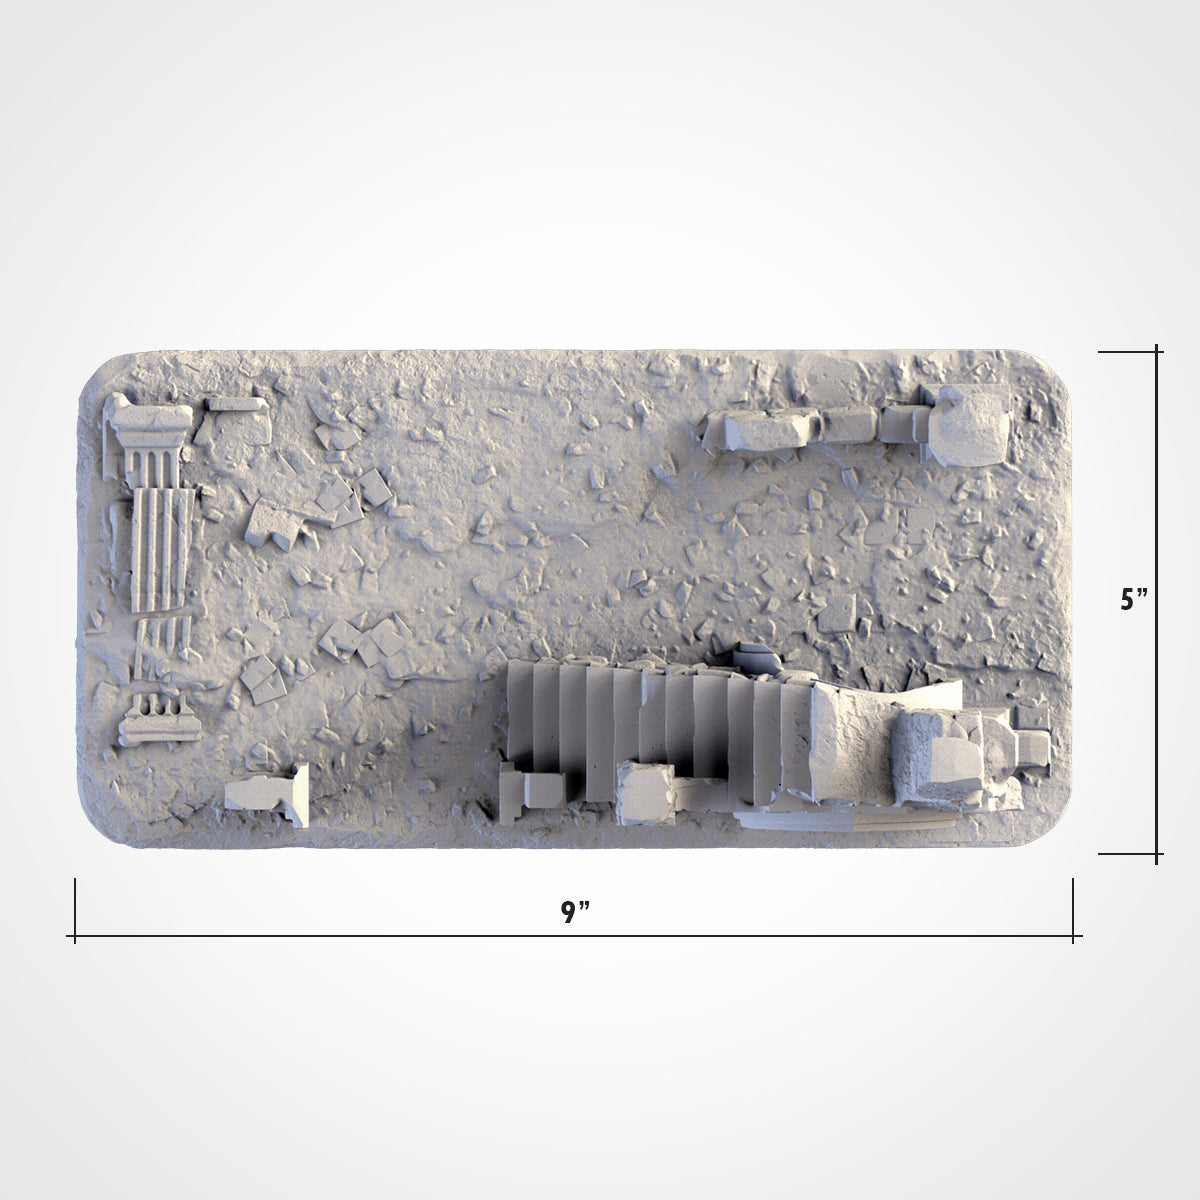 WTC Compatible Scatter - Various Styles | Scatter Terrain | Txarli Factory   | Table Top Gaming